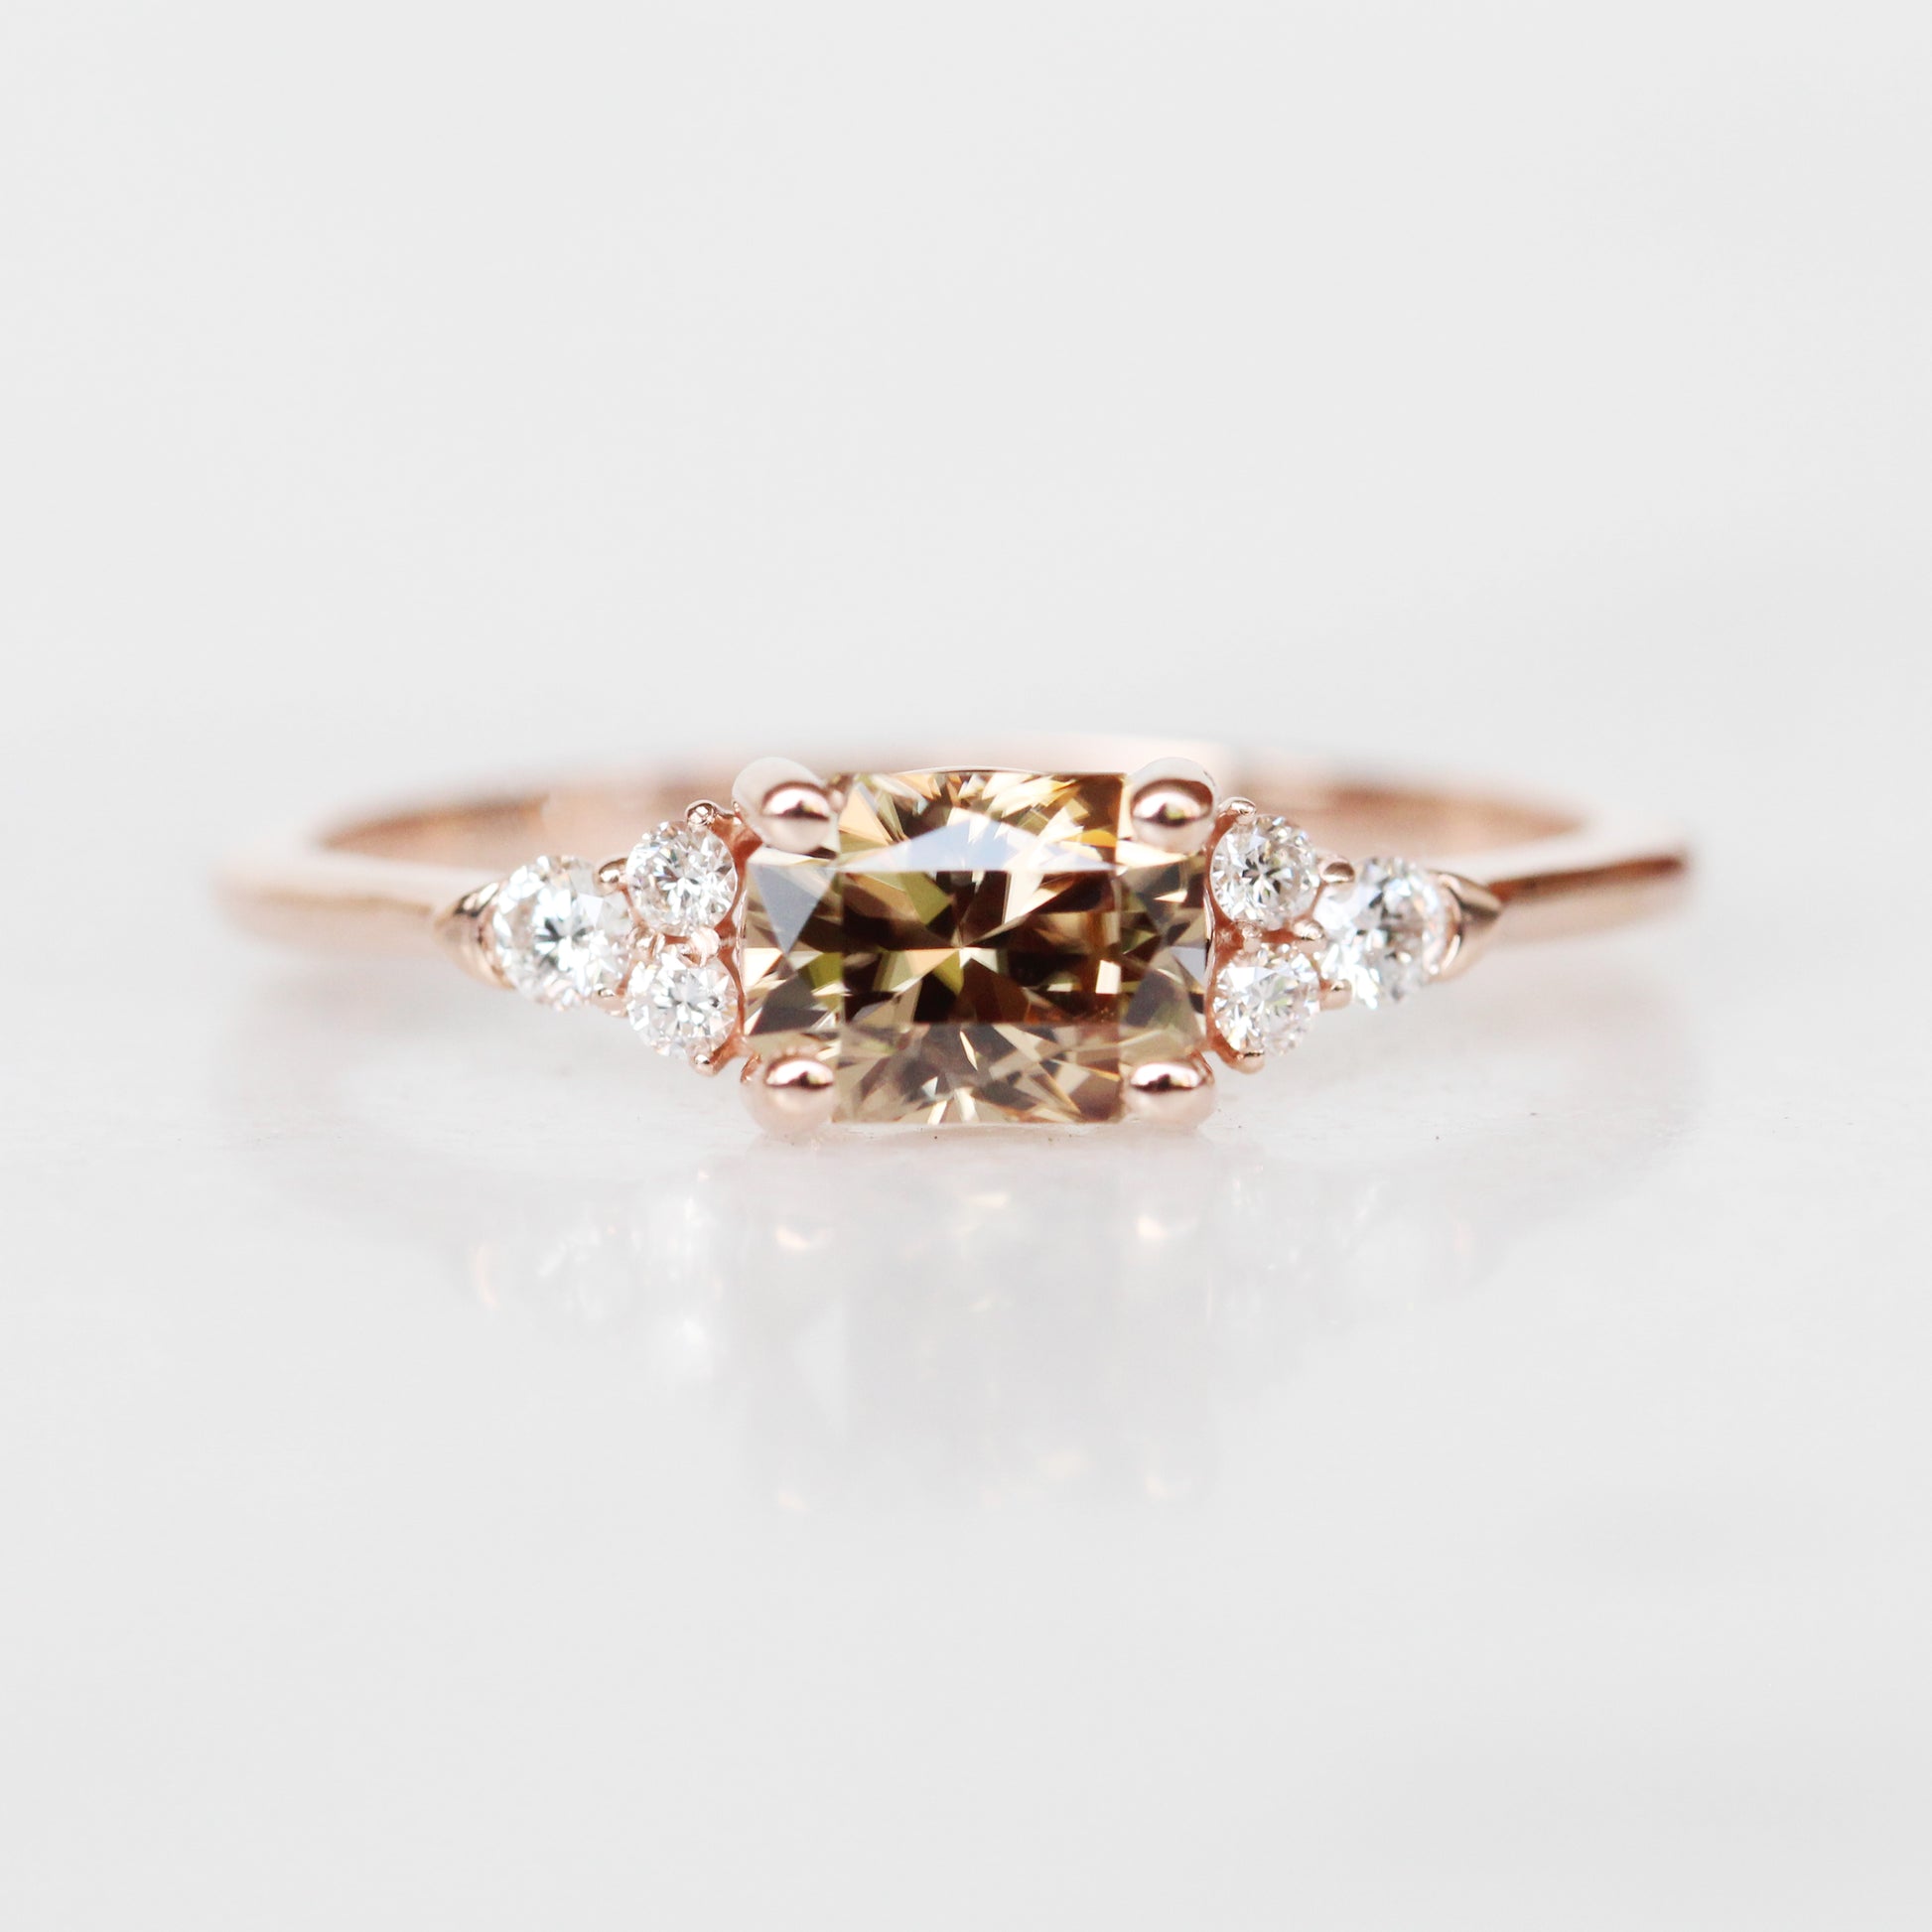 Cadence Ring with 1.13 ct Imperial Zircon and Diamonds in 10k Rose Gold - Ready to Size and Ship - Midwinter Co. Alternative Bridal Rings and Modern Fine Jewelry